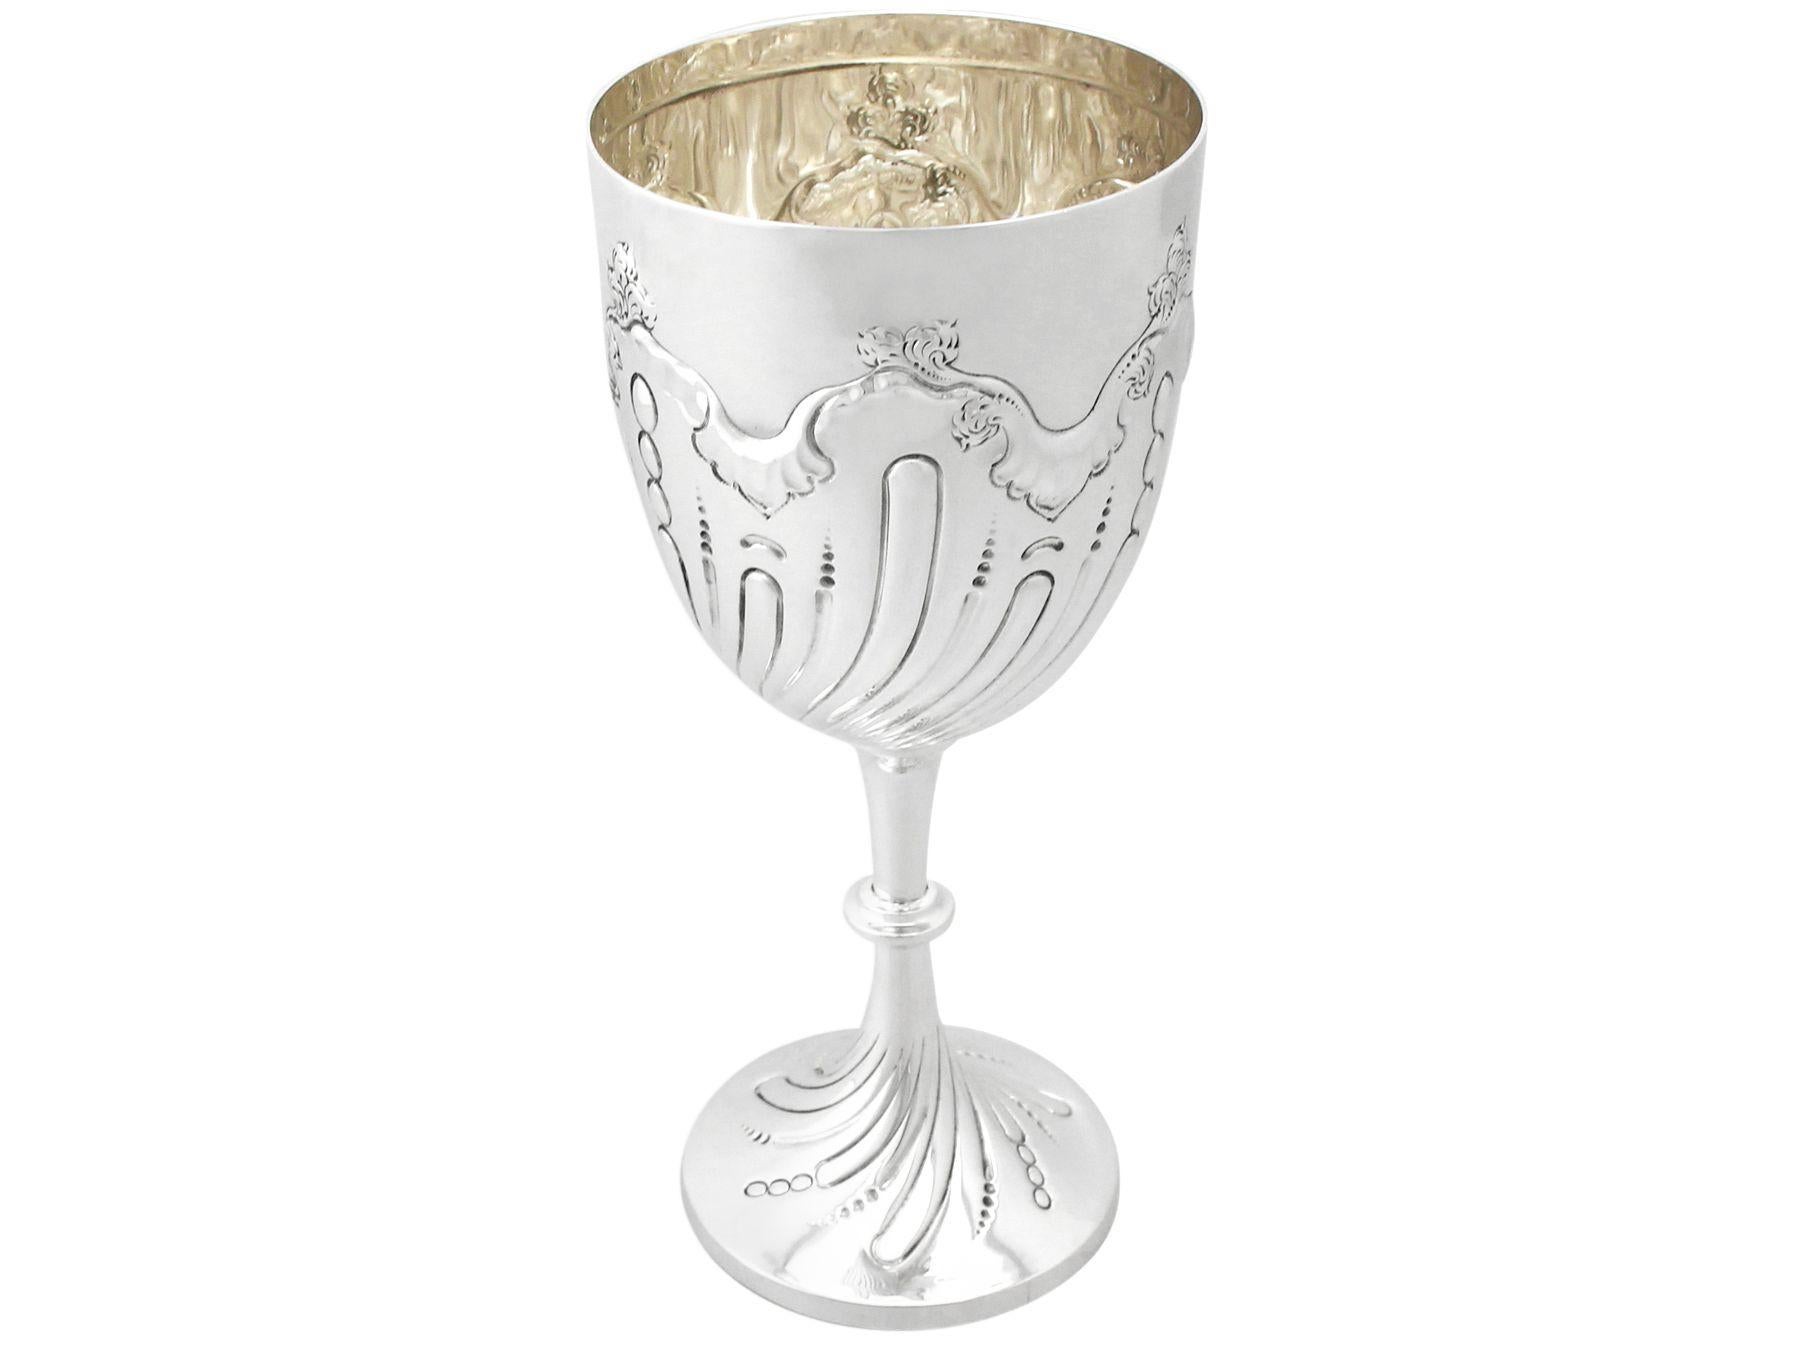 An exceptional, fine and impressive antique Victorian English sterling silver presentation cup; an addition to our presentation silverware collection.

This exceptional antique Victorian sterling silver presentation cup has a plain circular bell